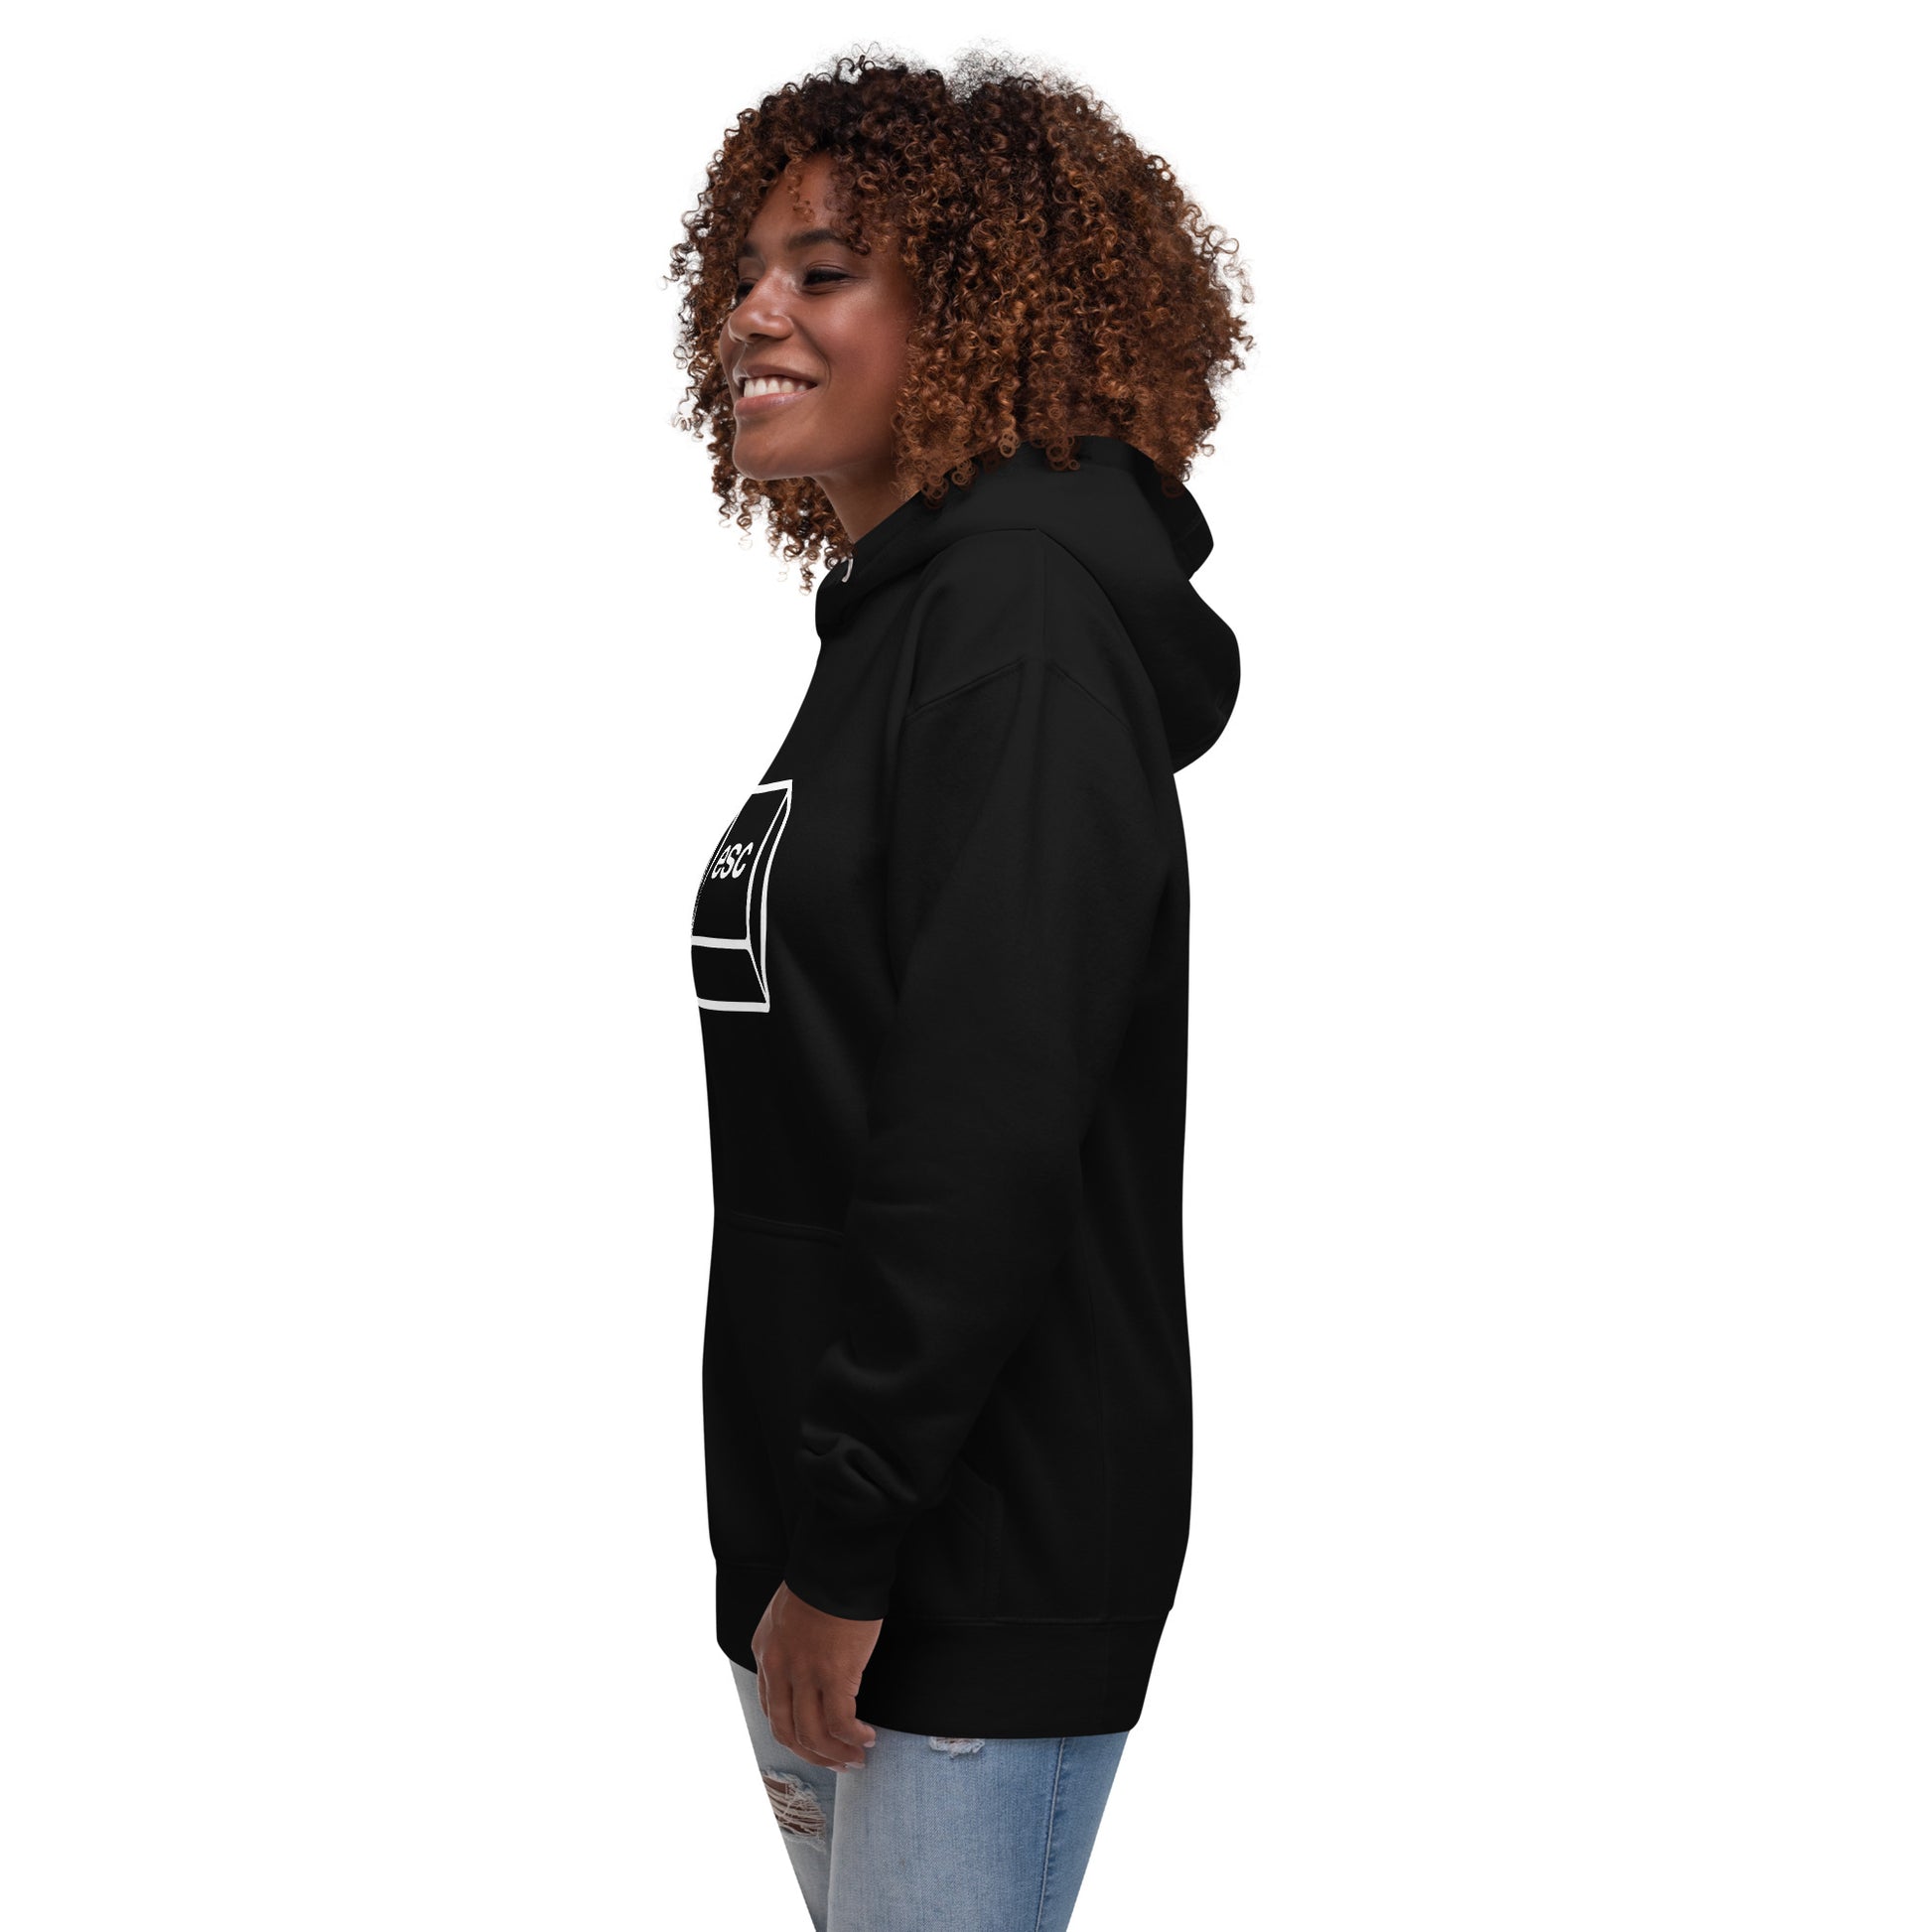 Women with black hoodie with picture of a esc key